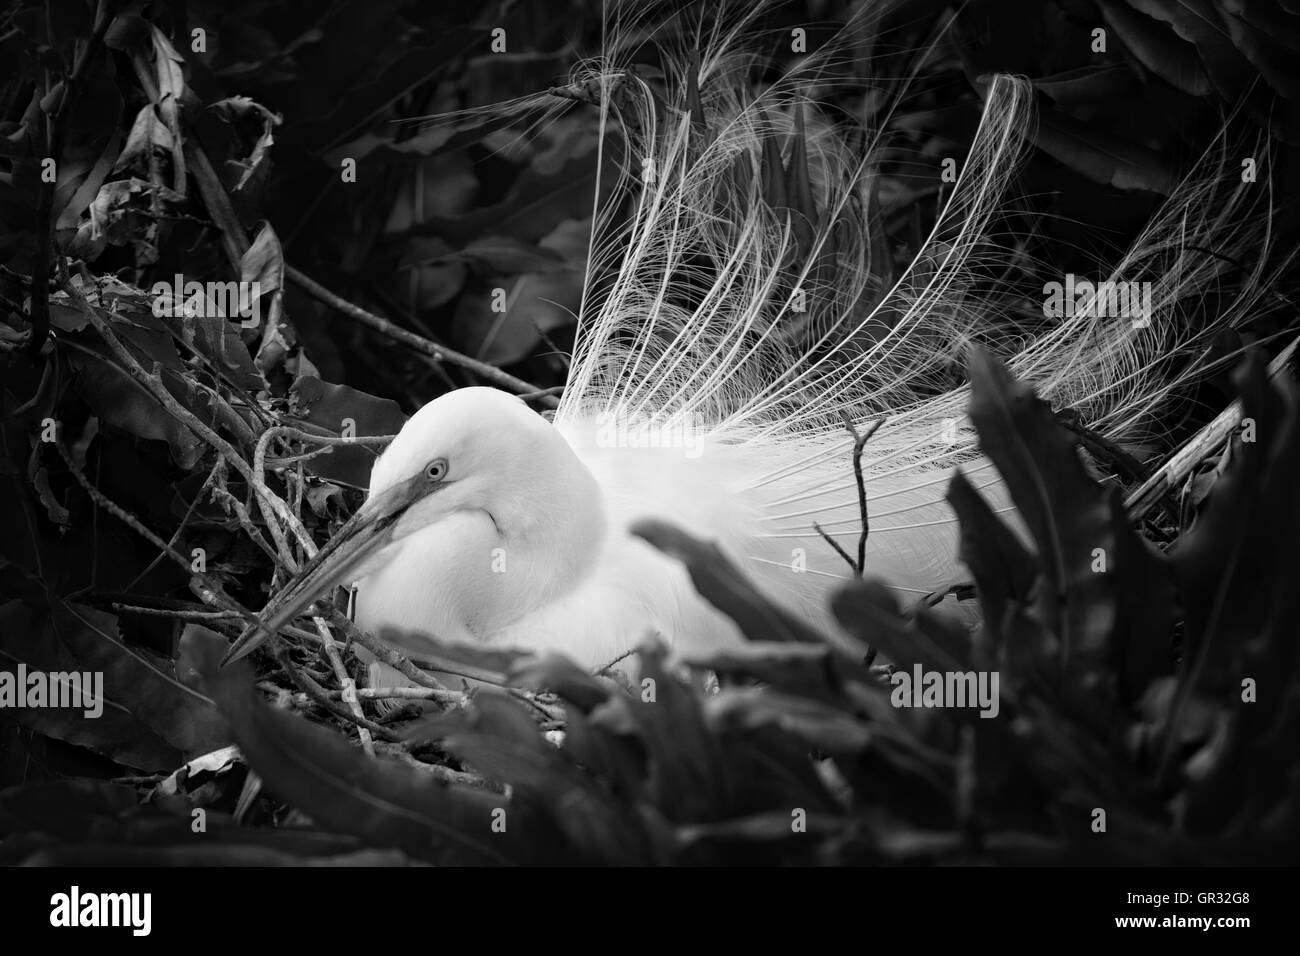 A White Egret Sits in Her Beauty on her nest of ferns with aigrettes draped all around in this black and white version. Stock Photo